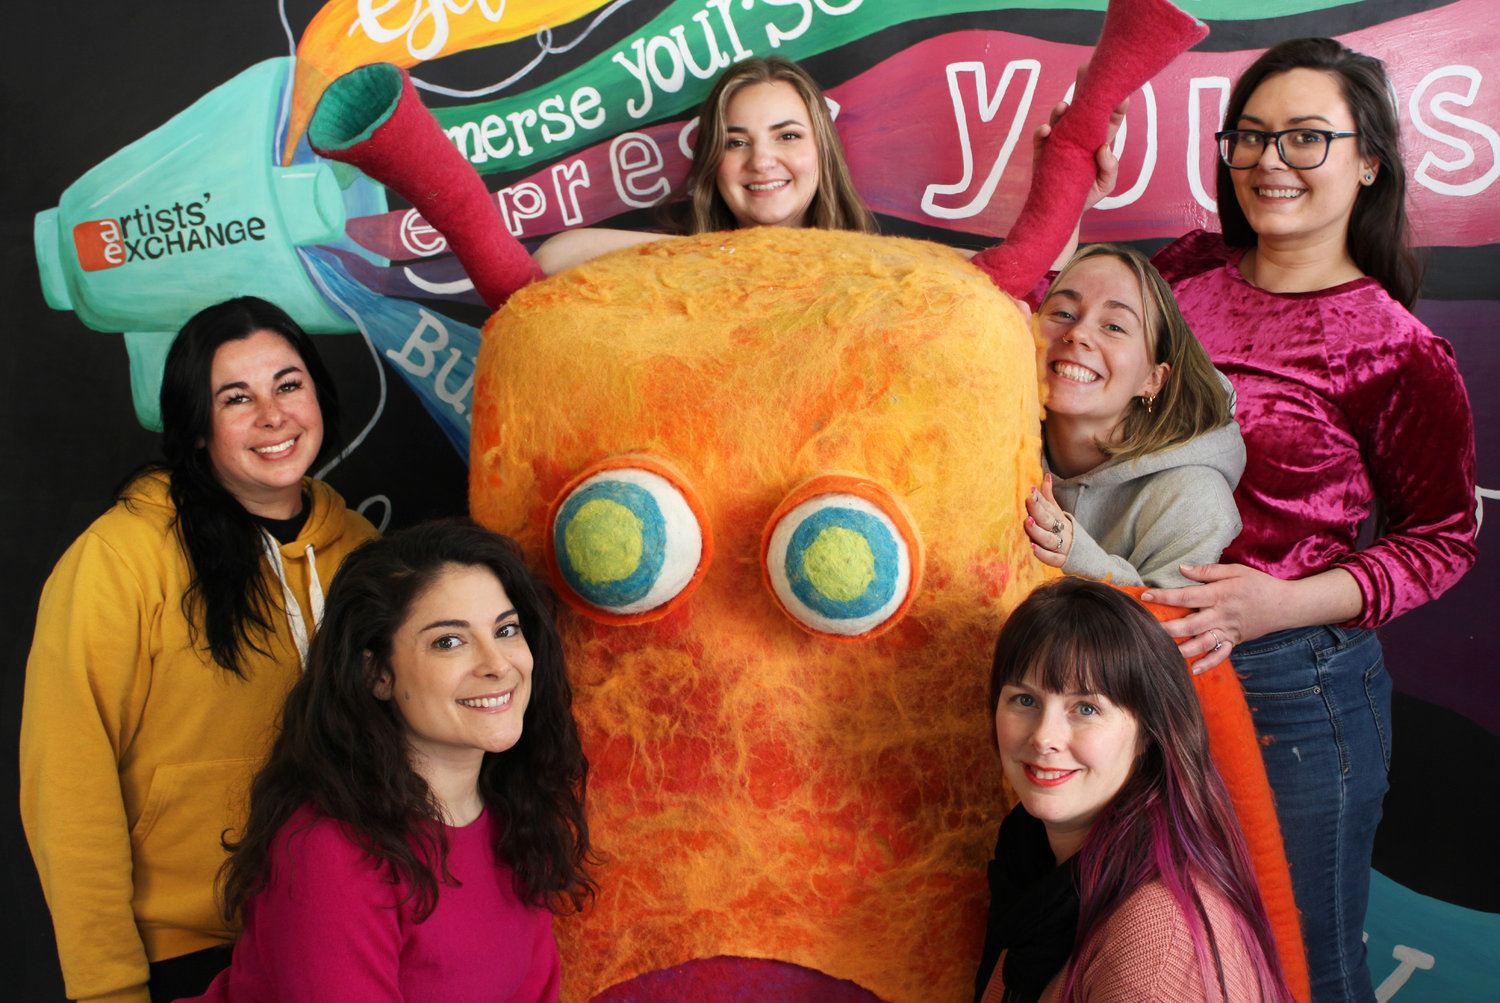 Artists' Exchange ladies with the mascot Woolly Nilly. Front Row: Vanessa Rundlett, Instructor; Shannon Casey, Director. Back Row: Jenny Sivo, Operations Manager; Abby Doyle, Assistant Teacher; Juliette Hoernle, Instructor; Emily Urban, Graphic Design